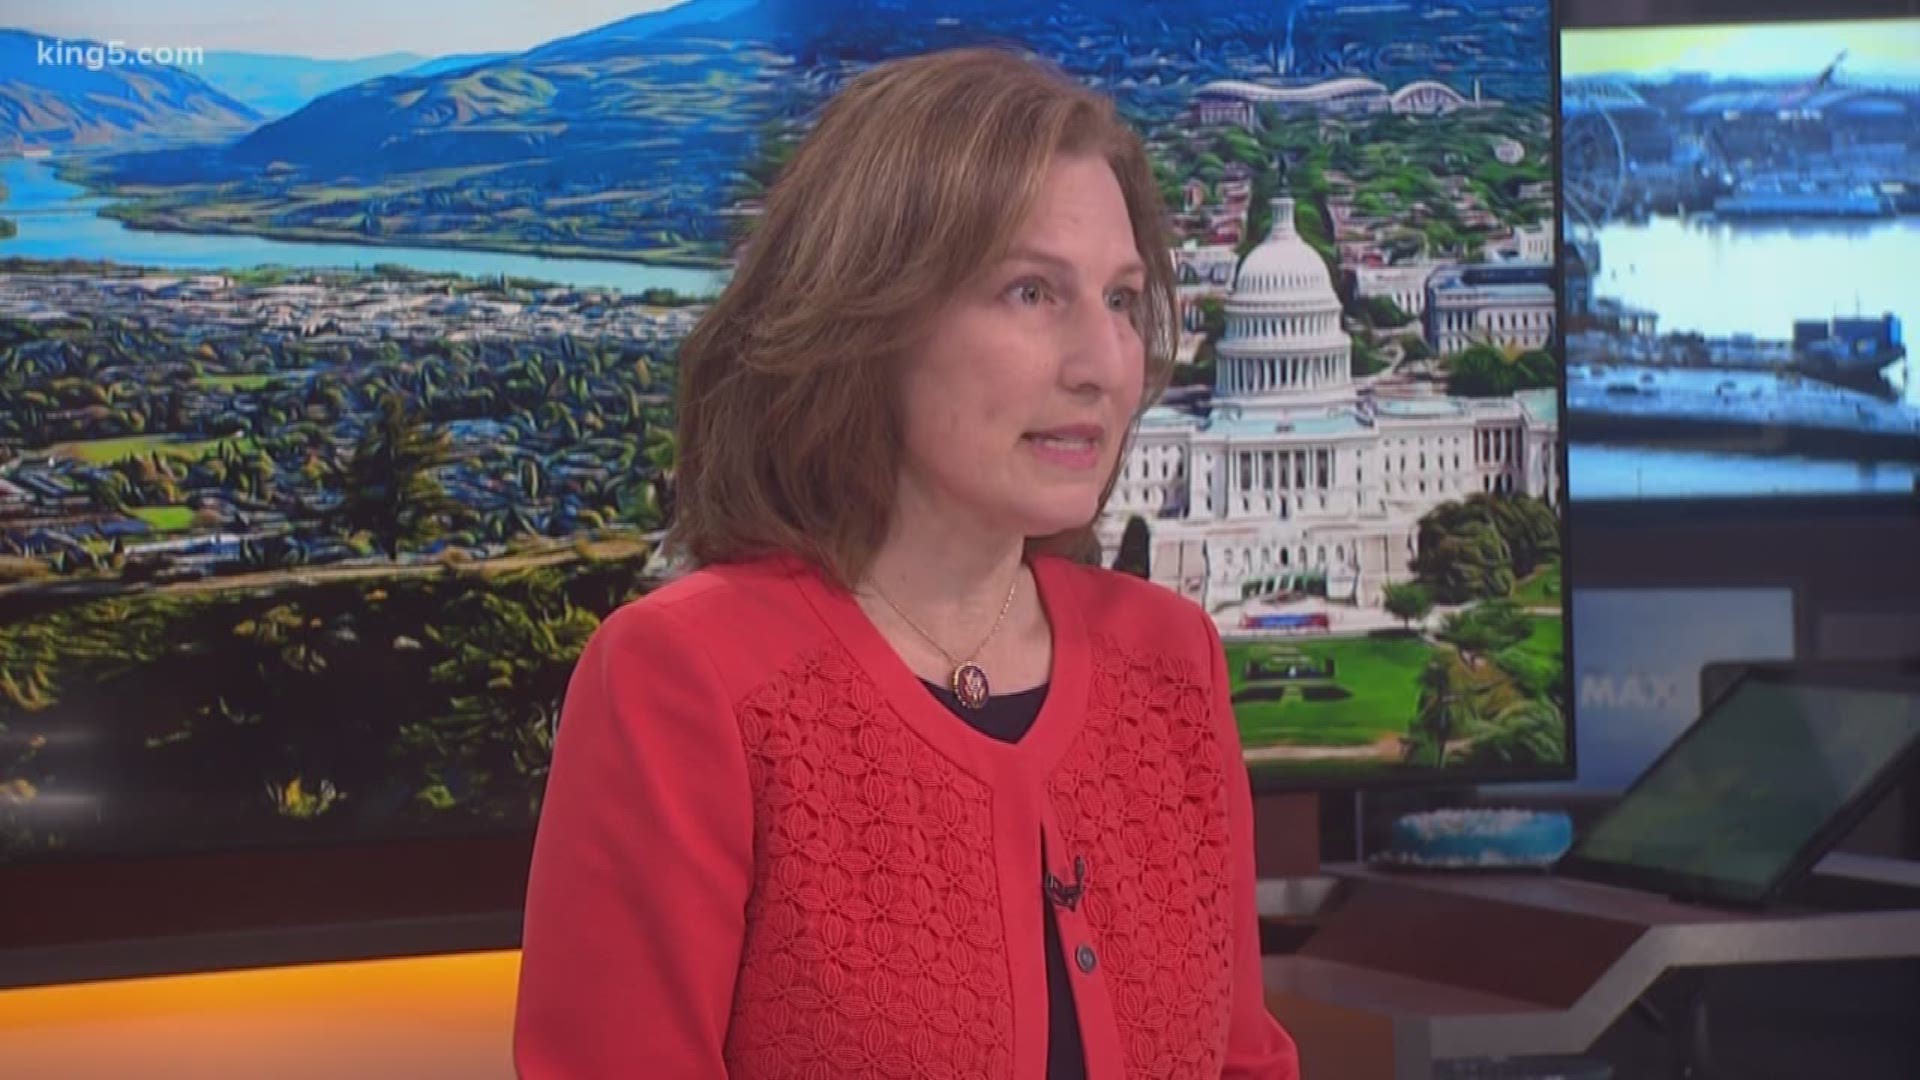 Rep. Kim Schrier (D WA-08) reflects on the hot button issues before Congress as law makers return to Washington, D.C after the holiday break.